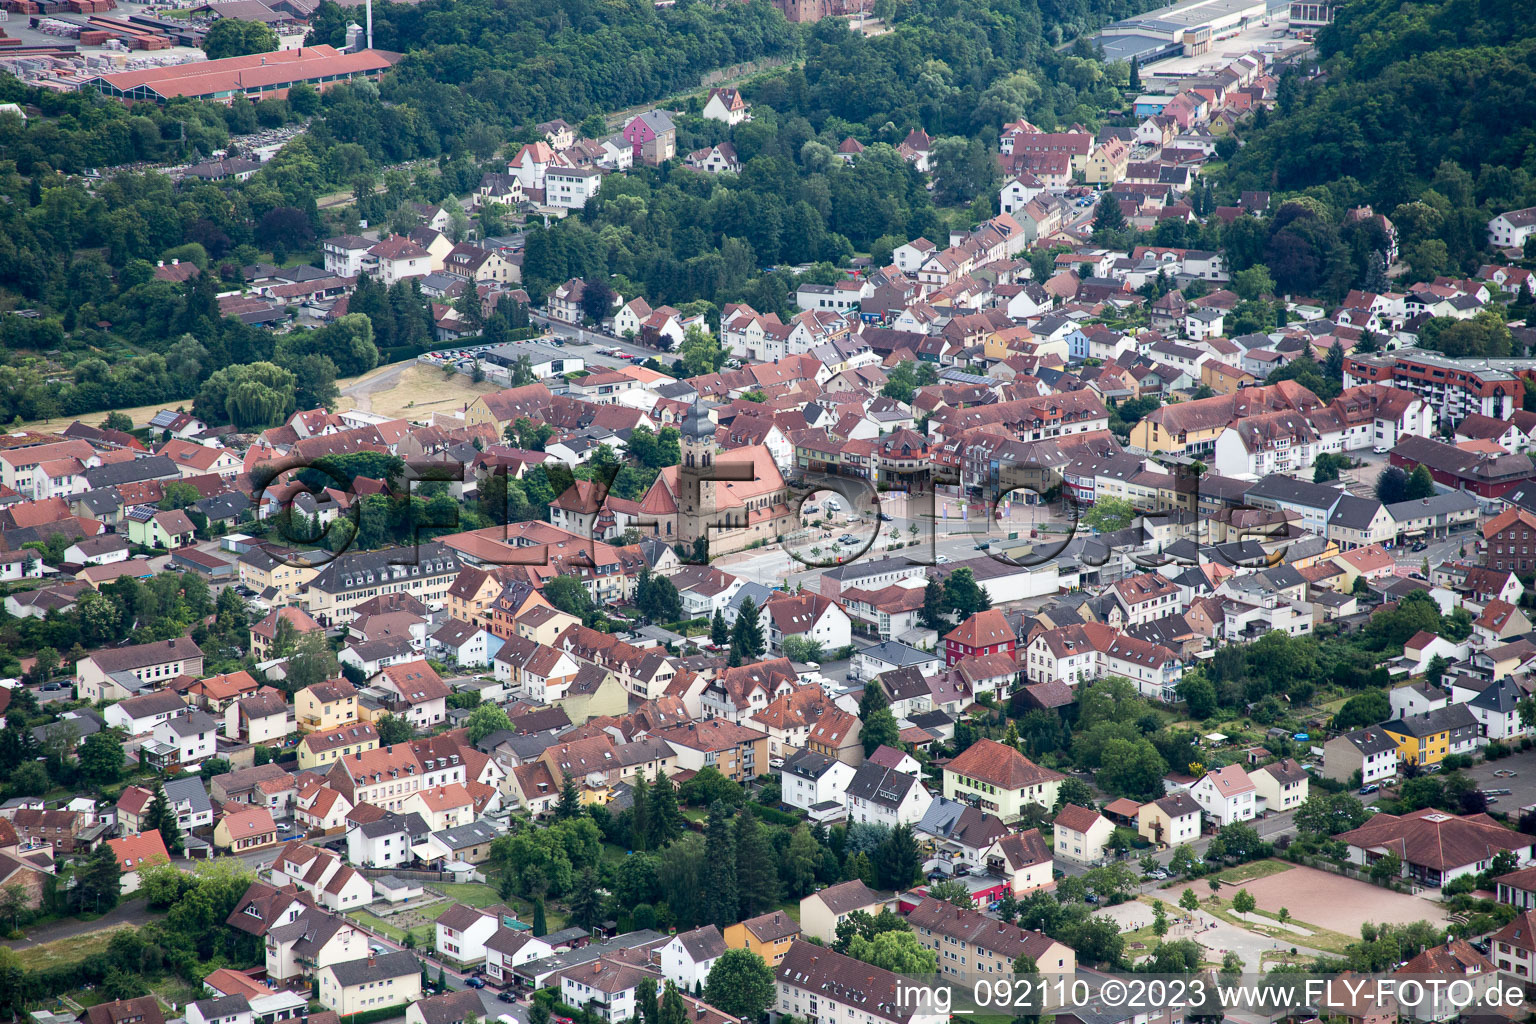 Eisenberg in the state Rhineland-Palatinate, Germany viewn from the air